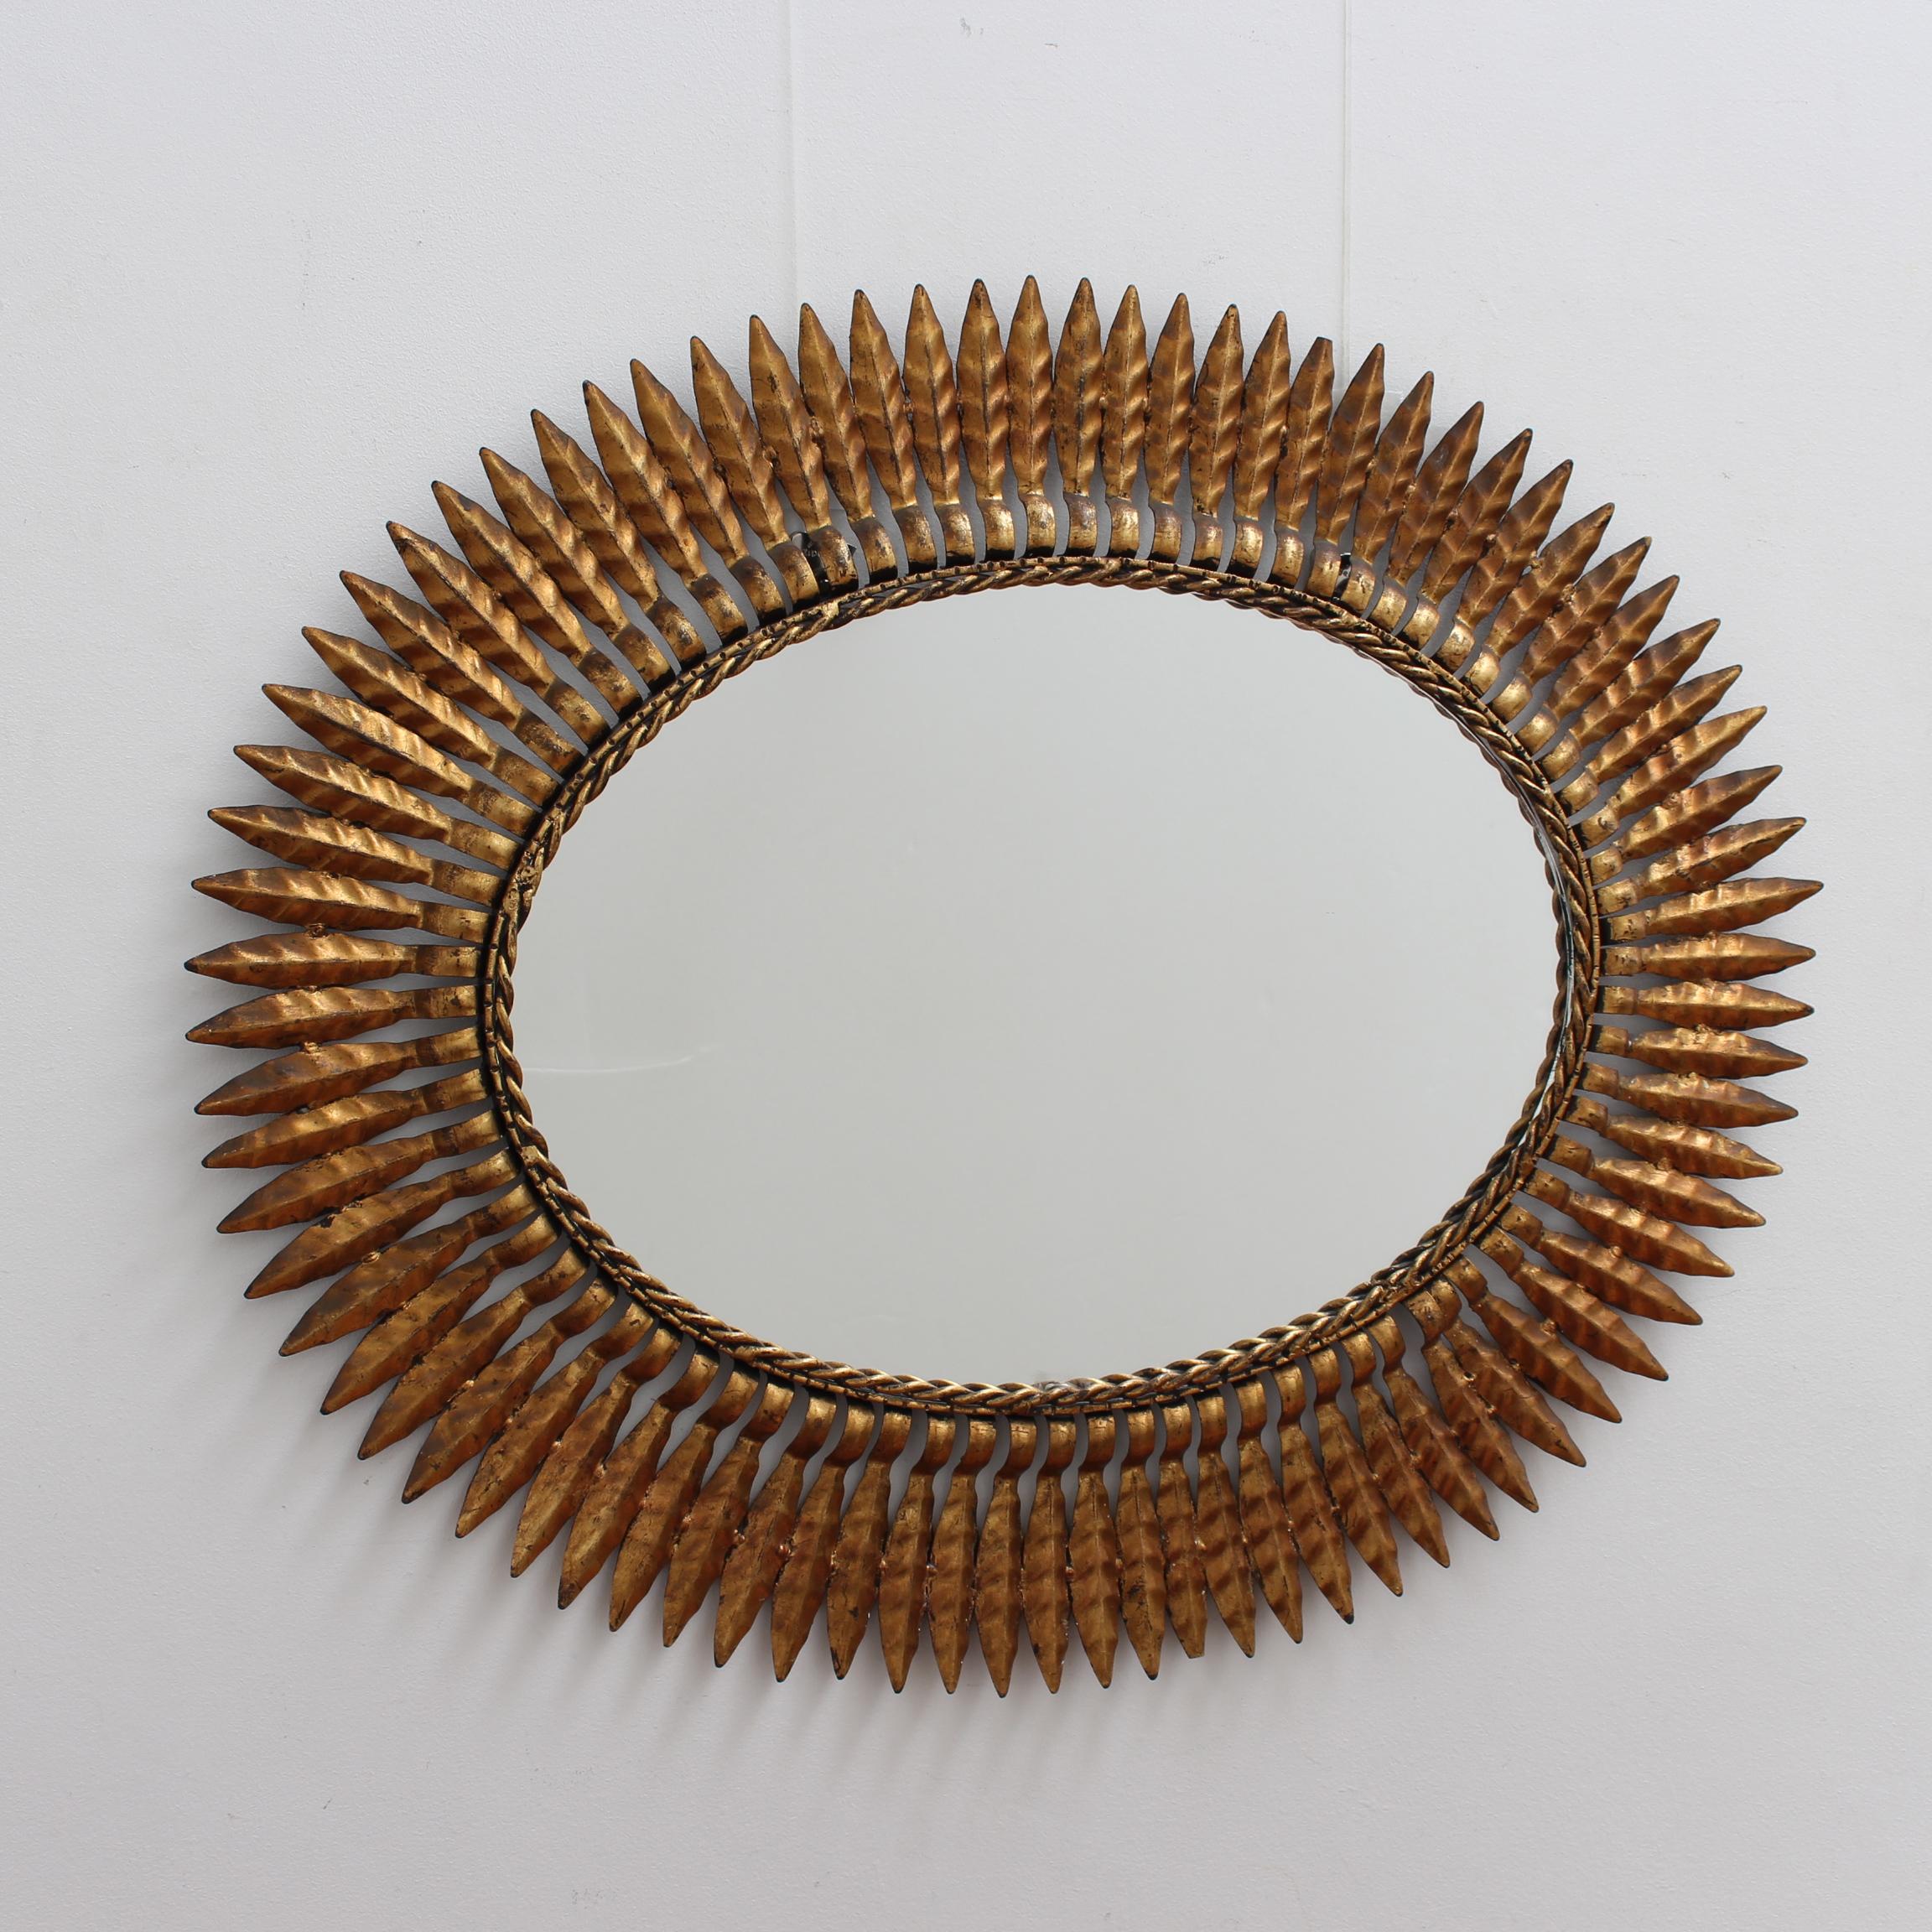 Spanish vintage gilt metal sunburst mirror (circa 1960s) with leaf motif rays and rope-pattern mirror border. Some authentic age spots and characterful markings appear on gilt surface adding to its presence while reflecting its true age and history.